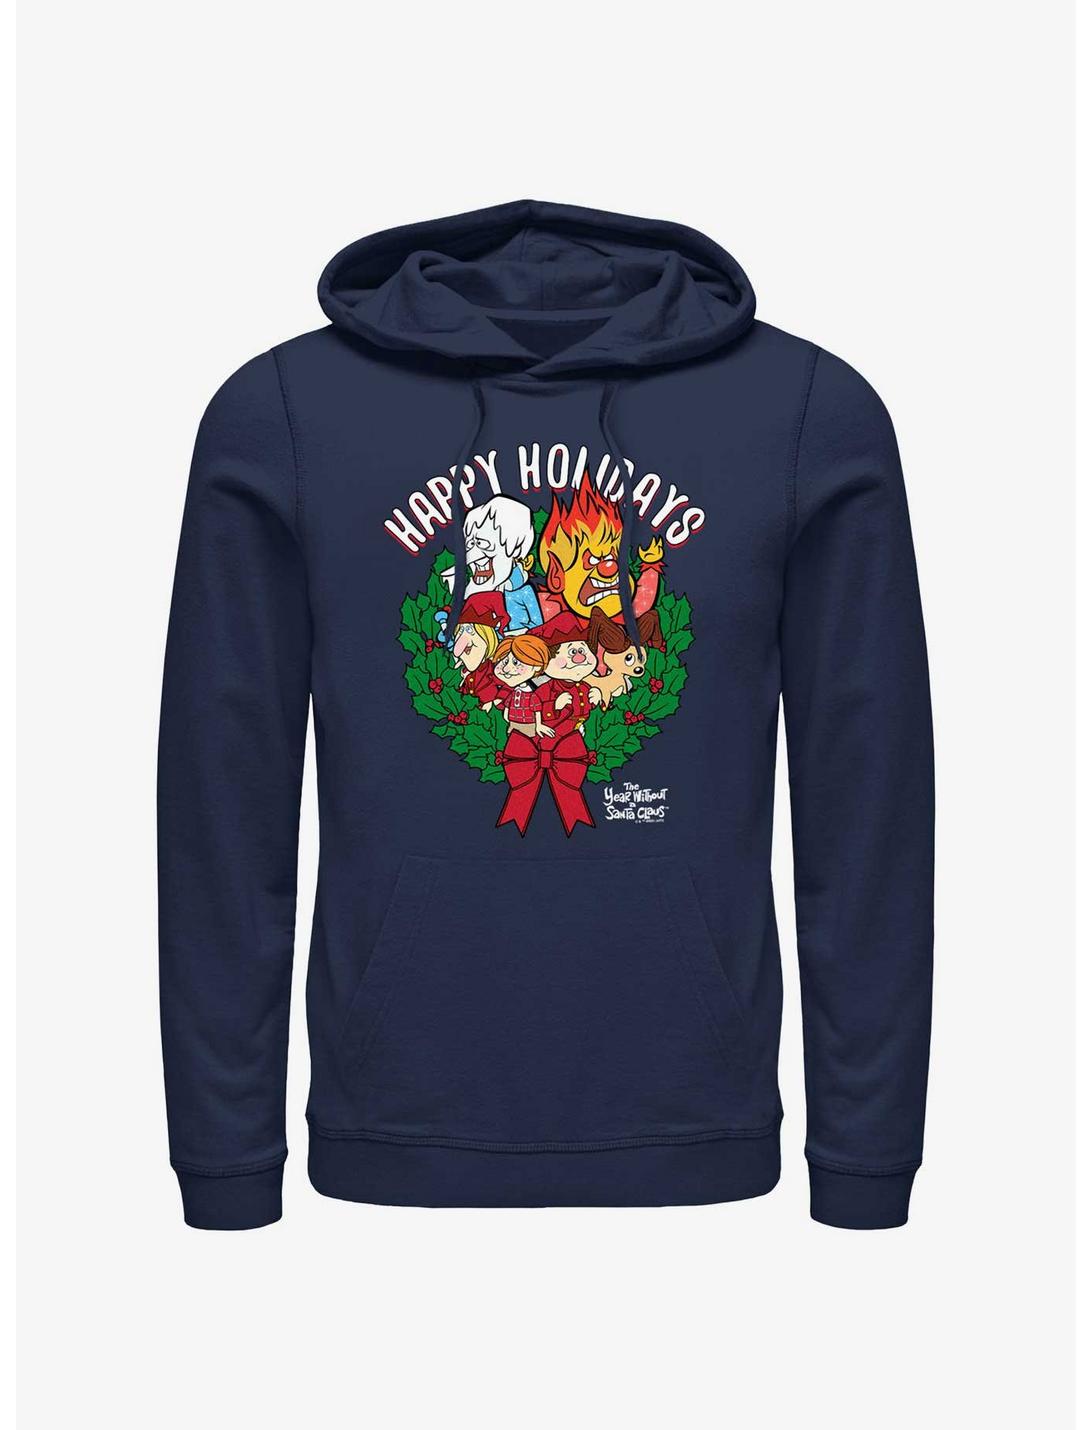 The Year Without a Santa Claus Happy Holidays Wreath Hoodie, NAVY, hi-res